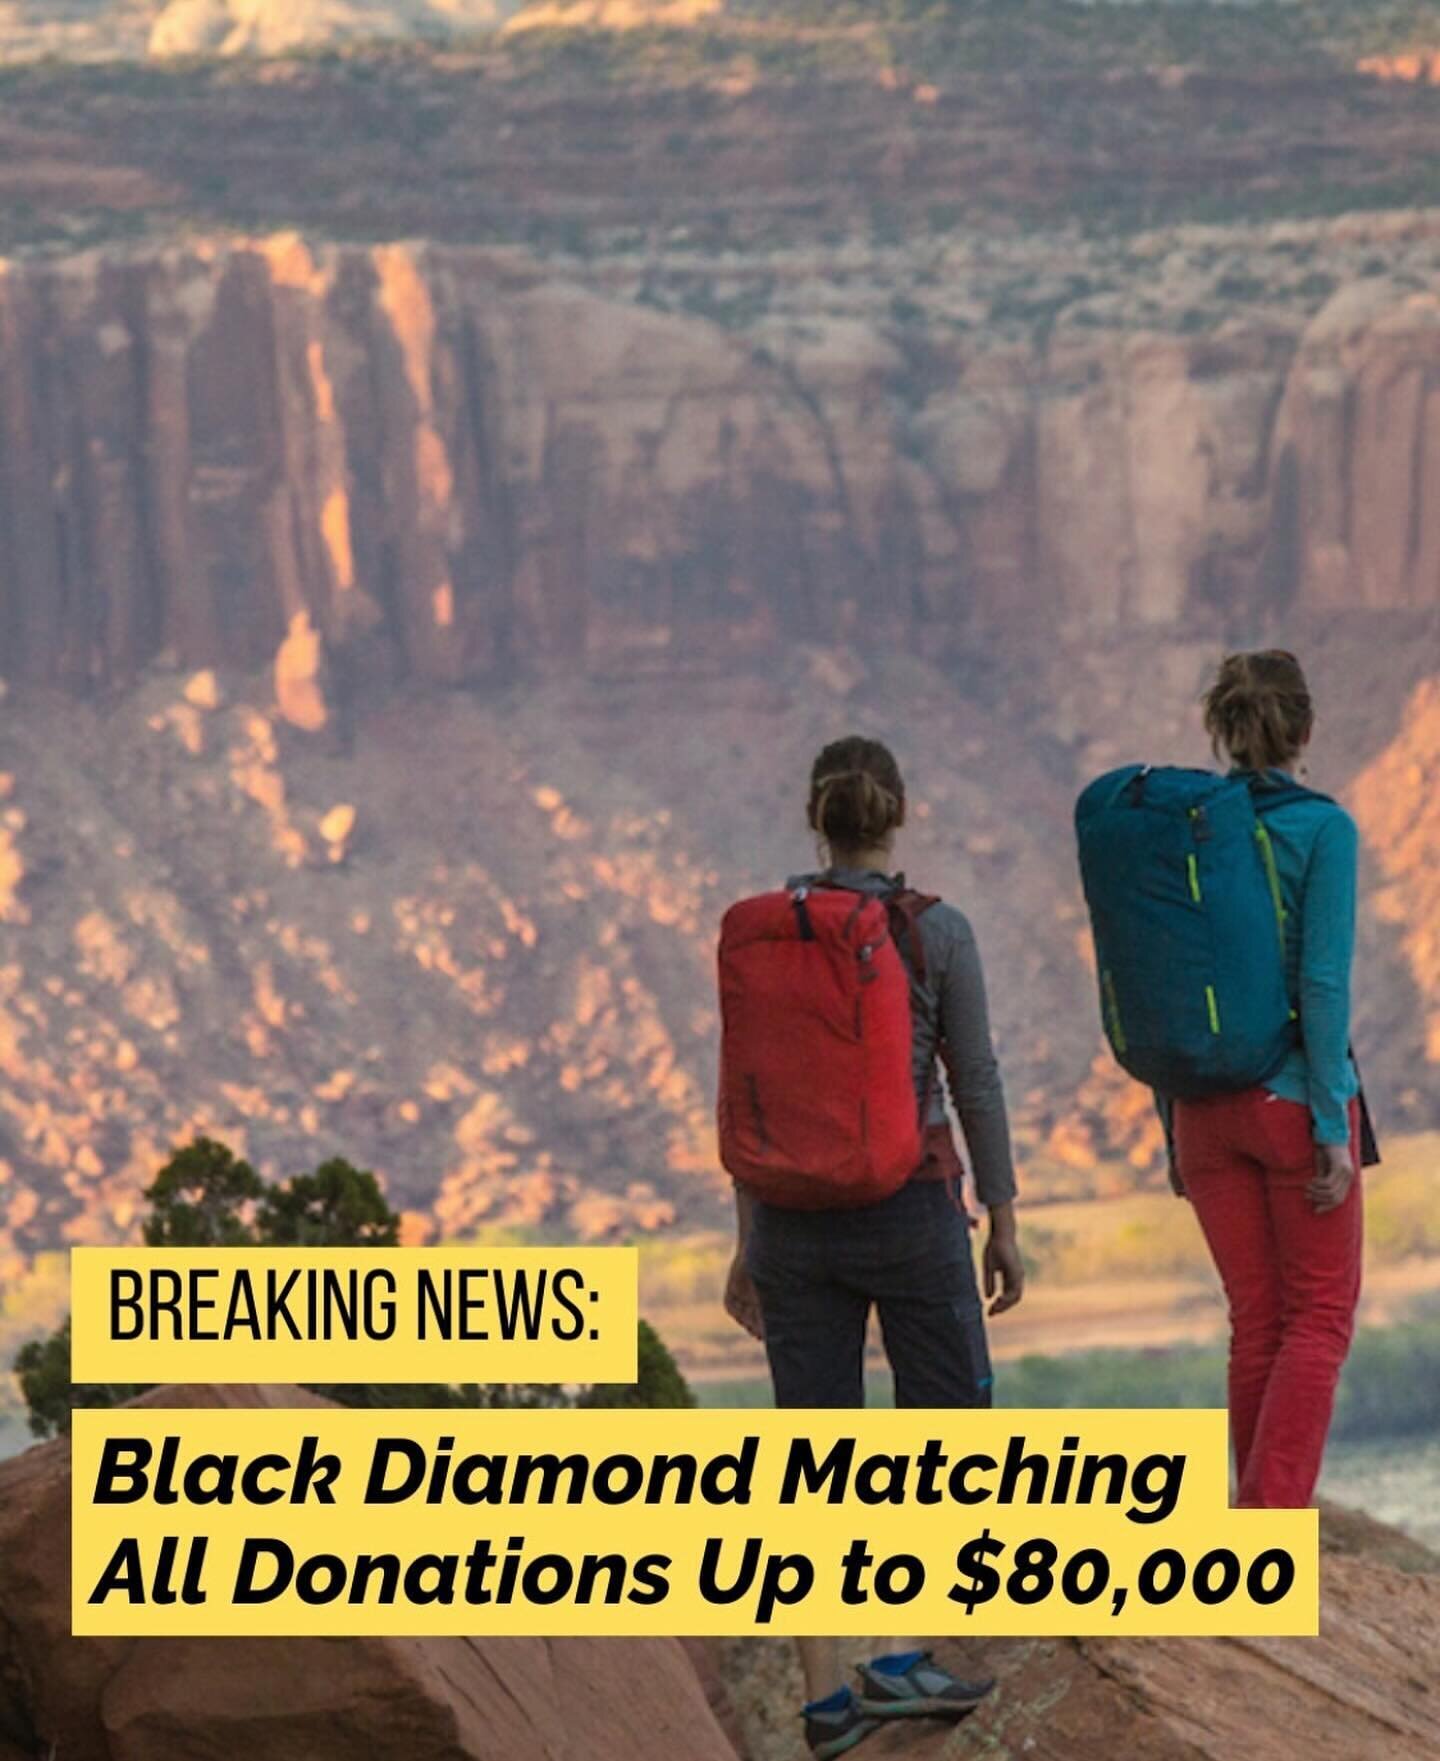 *Repost*
BREAKING: Black Diamond has stepped up to match all donations to @accessfund &mdash;up to $80,000&mdash;to help us protect the places we love to climb. Donate now at accessfund.org/protect, and your donation will be doubled instantly.